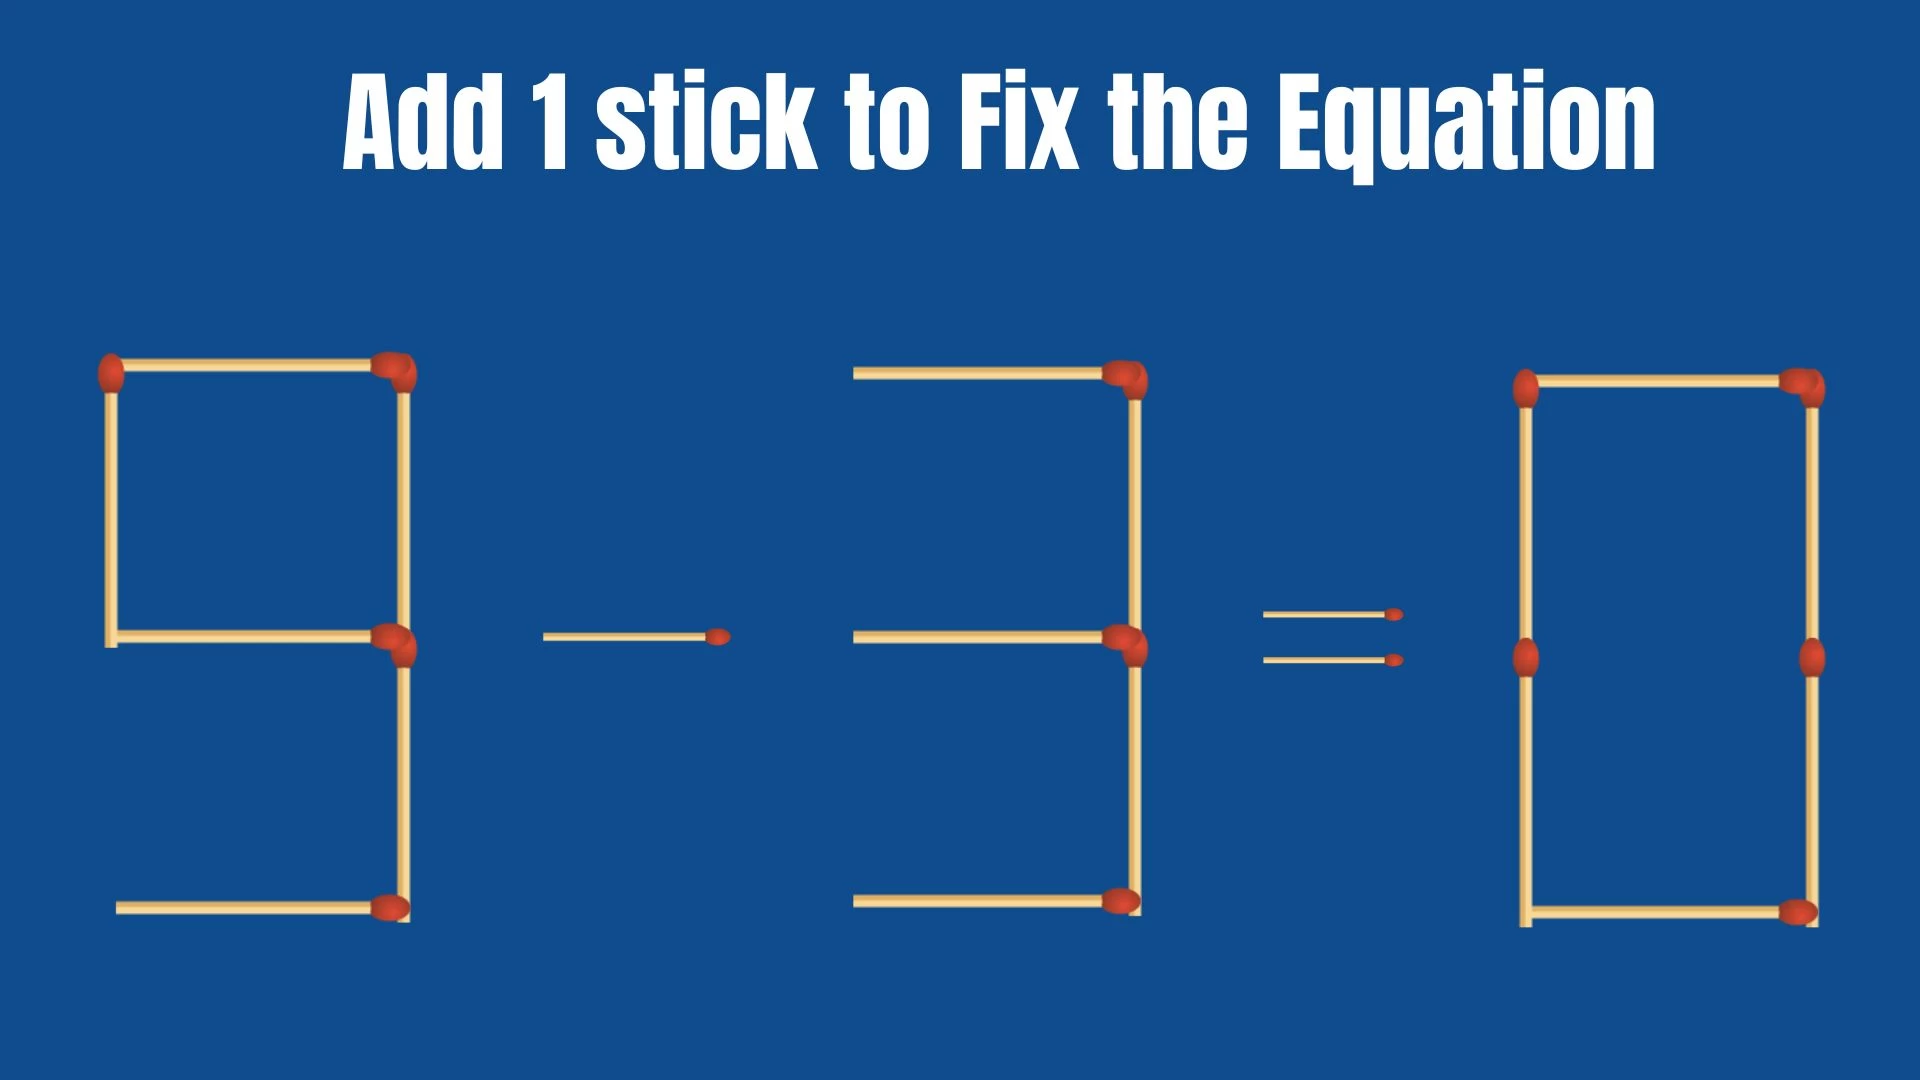 Solve the Puzzle to Transform 9-3=0 by Adding 1 Matchstick to Correct the Equation